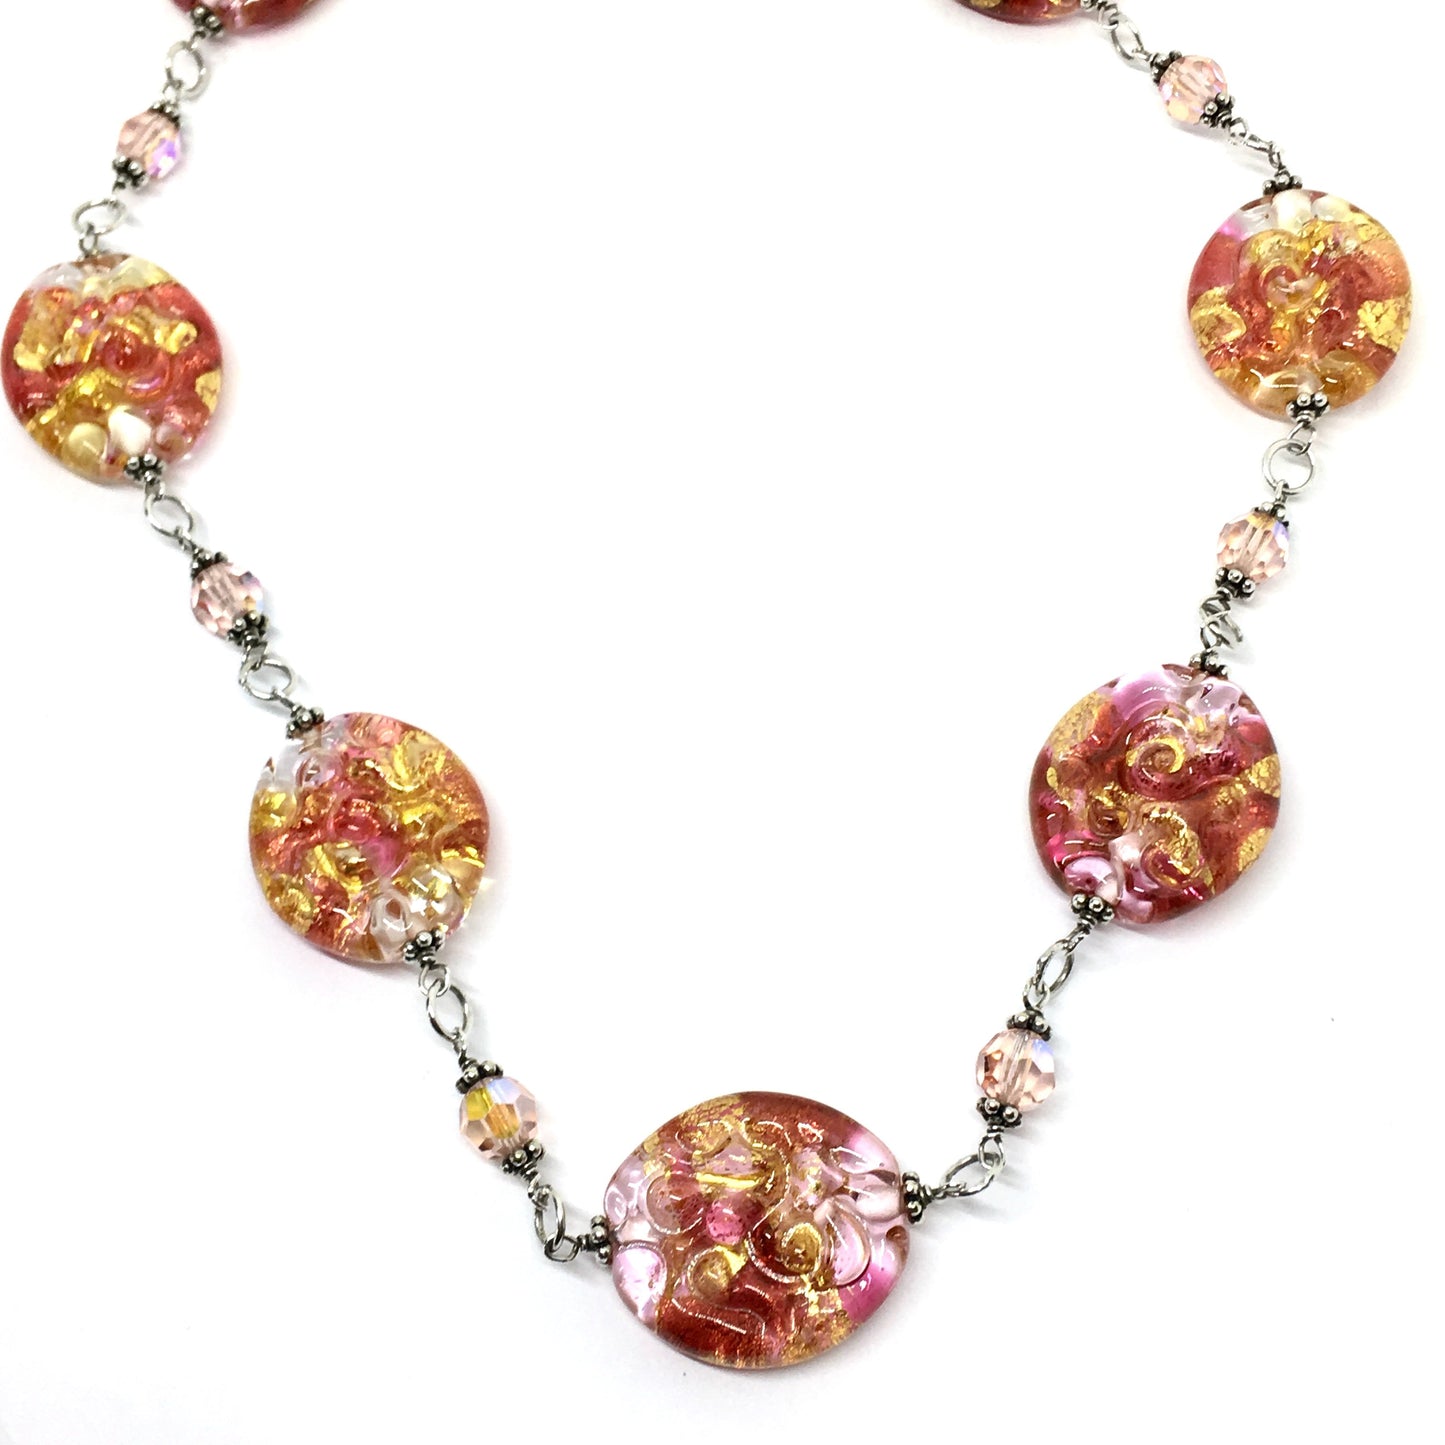 Necklace - Sterling Silver - Golden Sunset Murano Glass Bead Necklace -21 inch Chain Necklace - Layering Satellite Chain